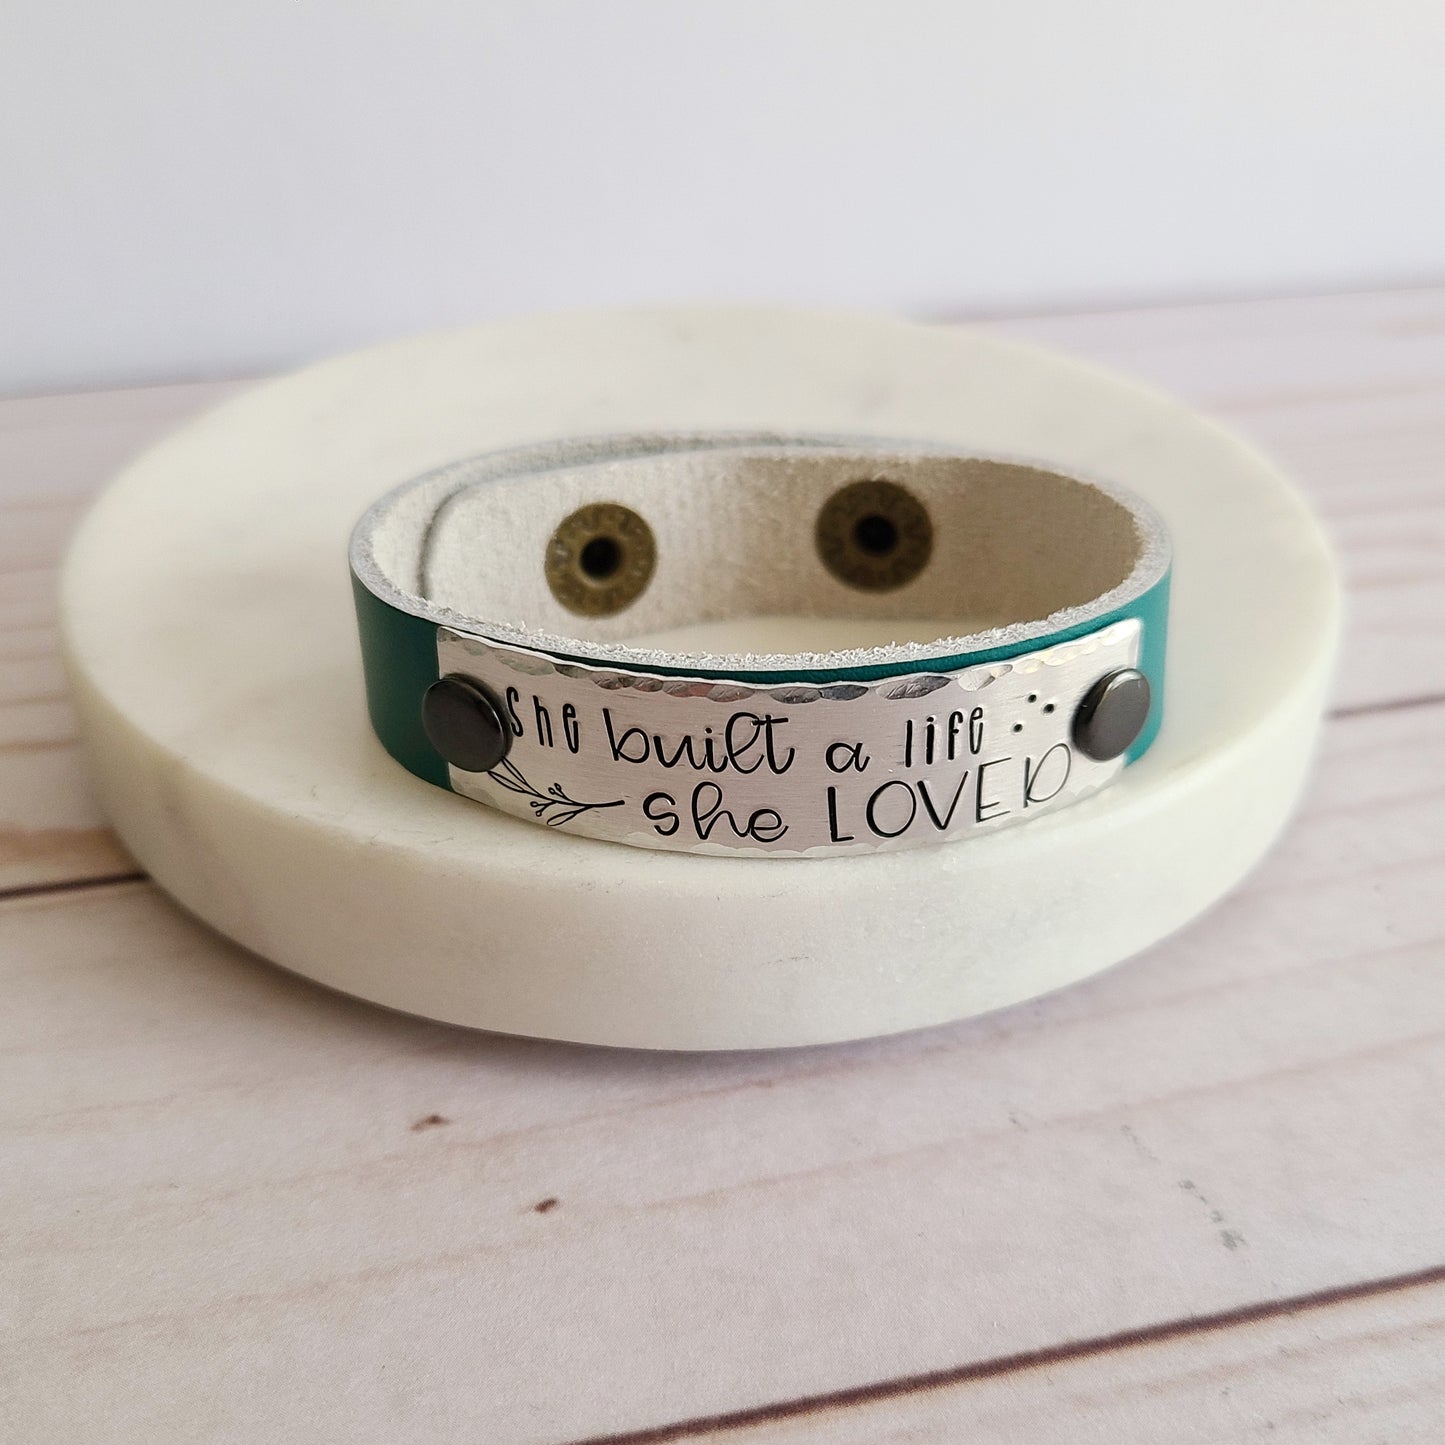 She Built A Life She Loved - Teal Leather Cuff Bracelet